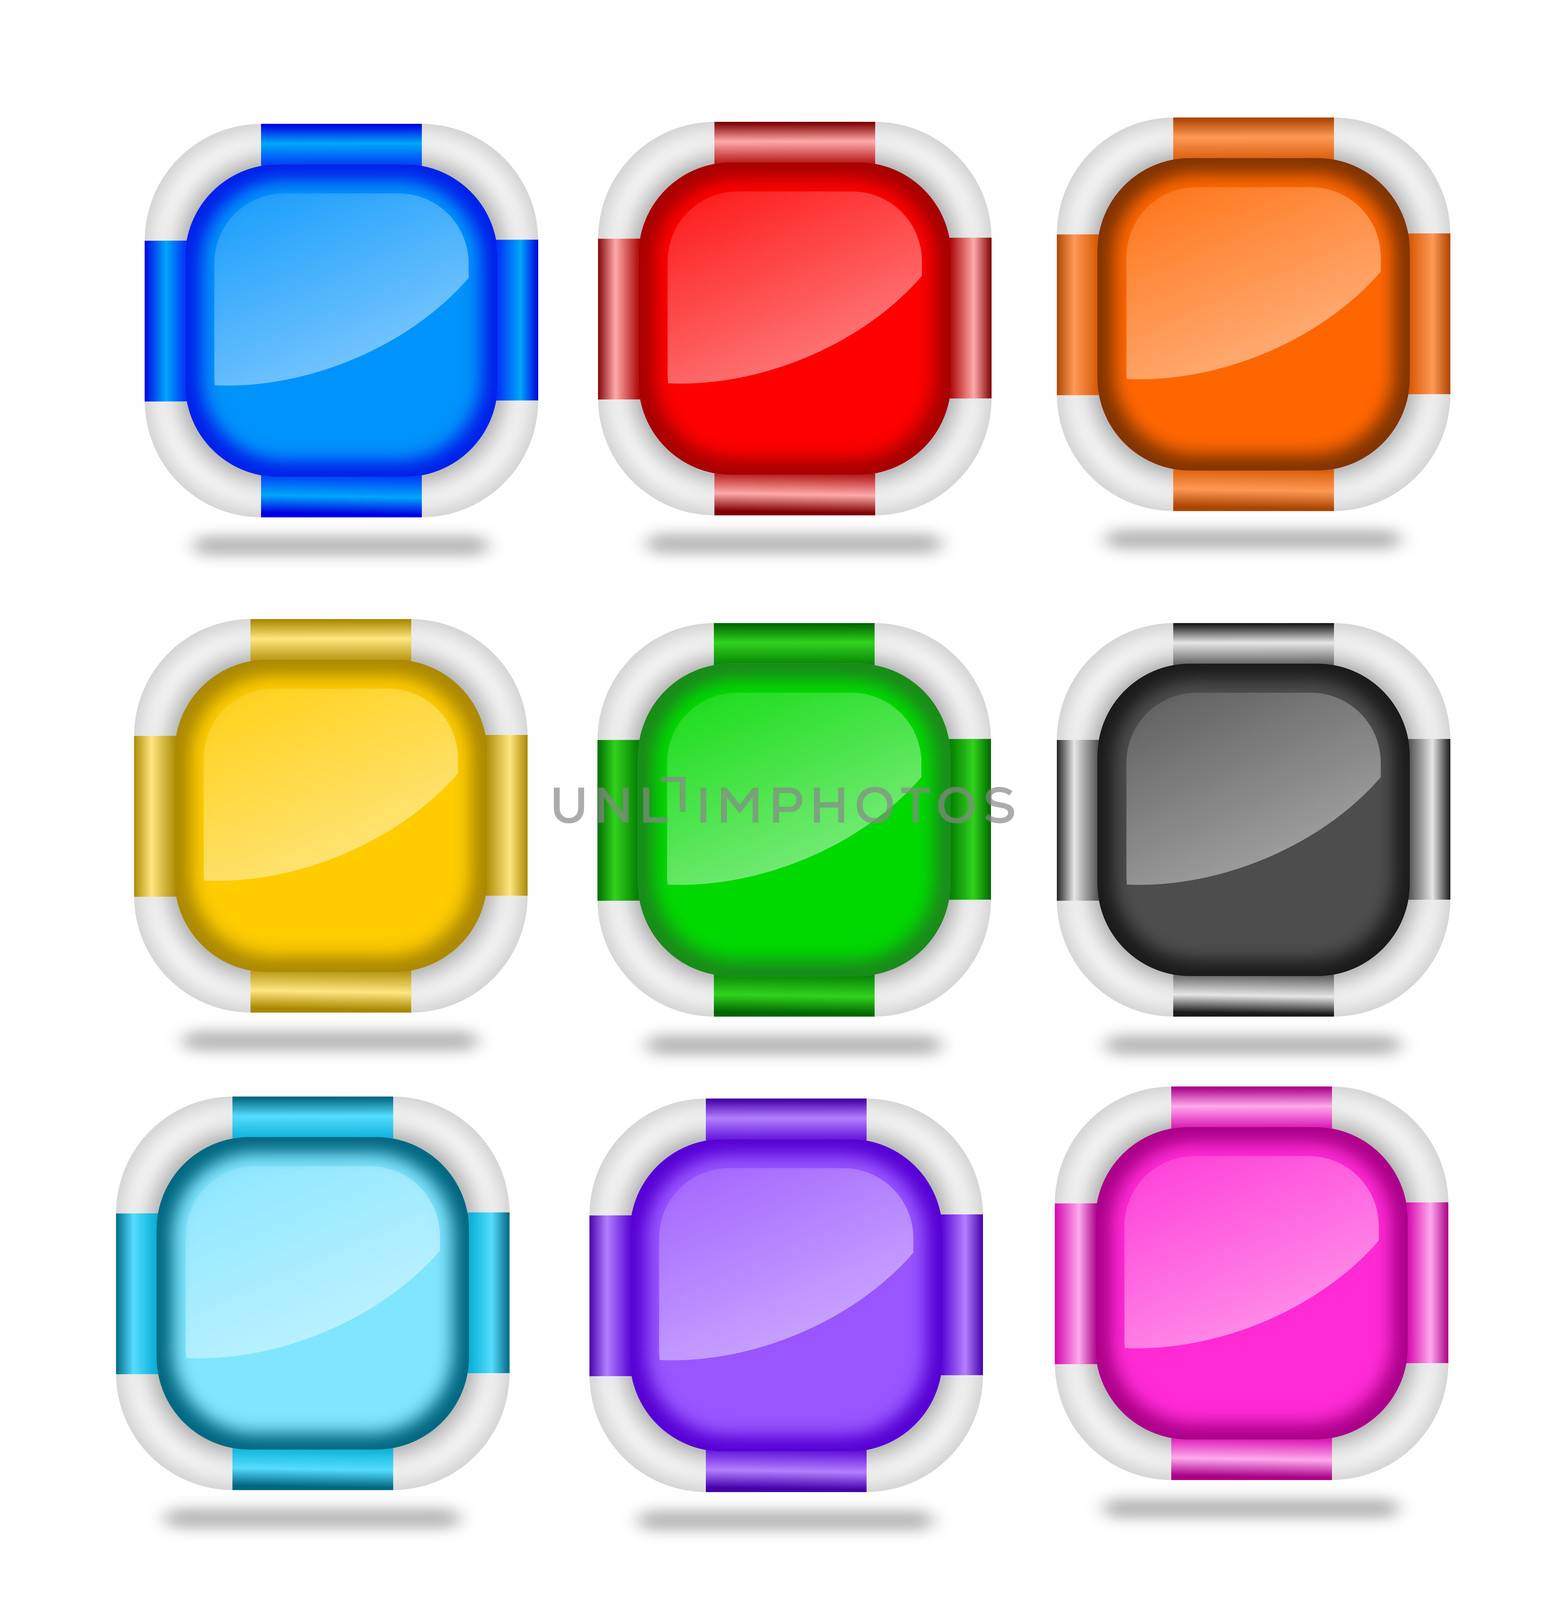 Square Web Buttons with Bevel Rims by RichieThakur